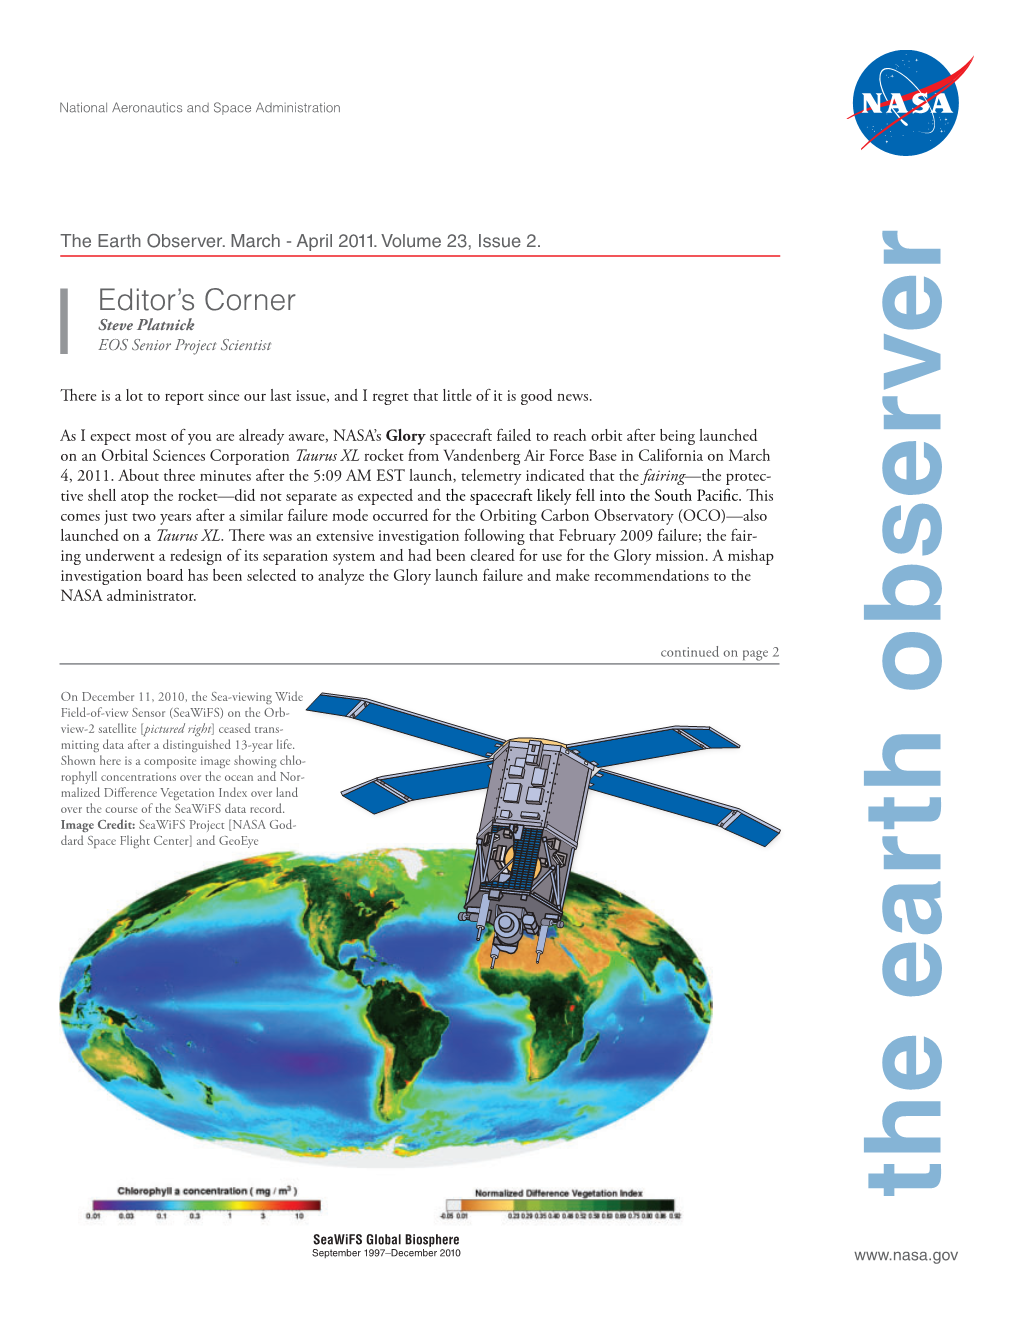 The Earth Observer, March